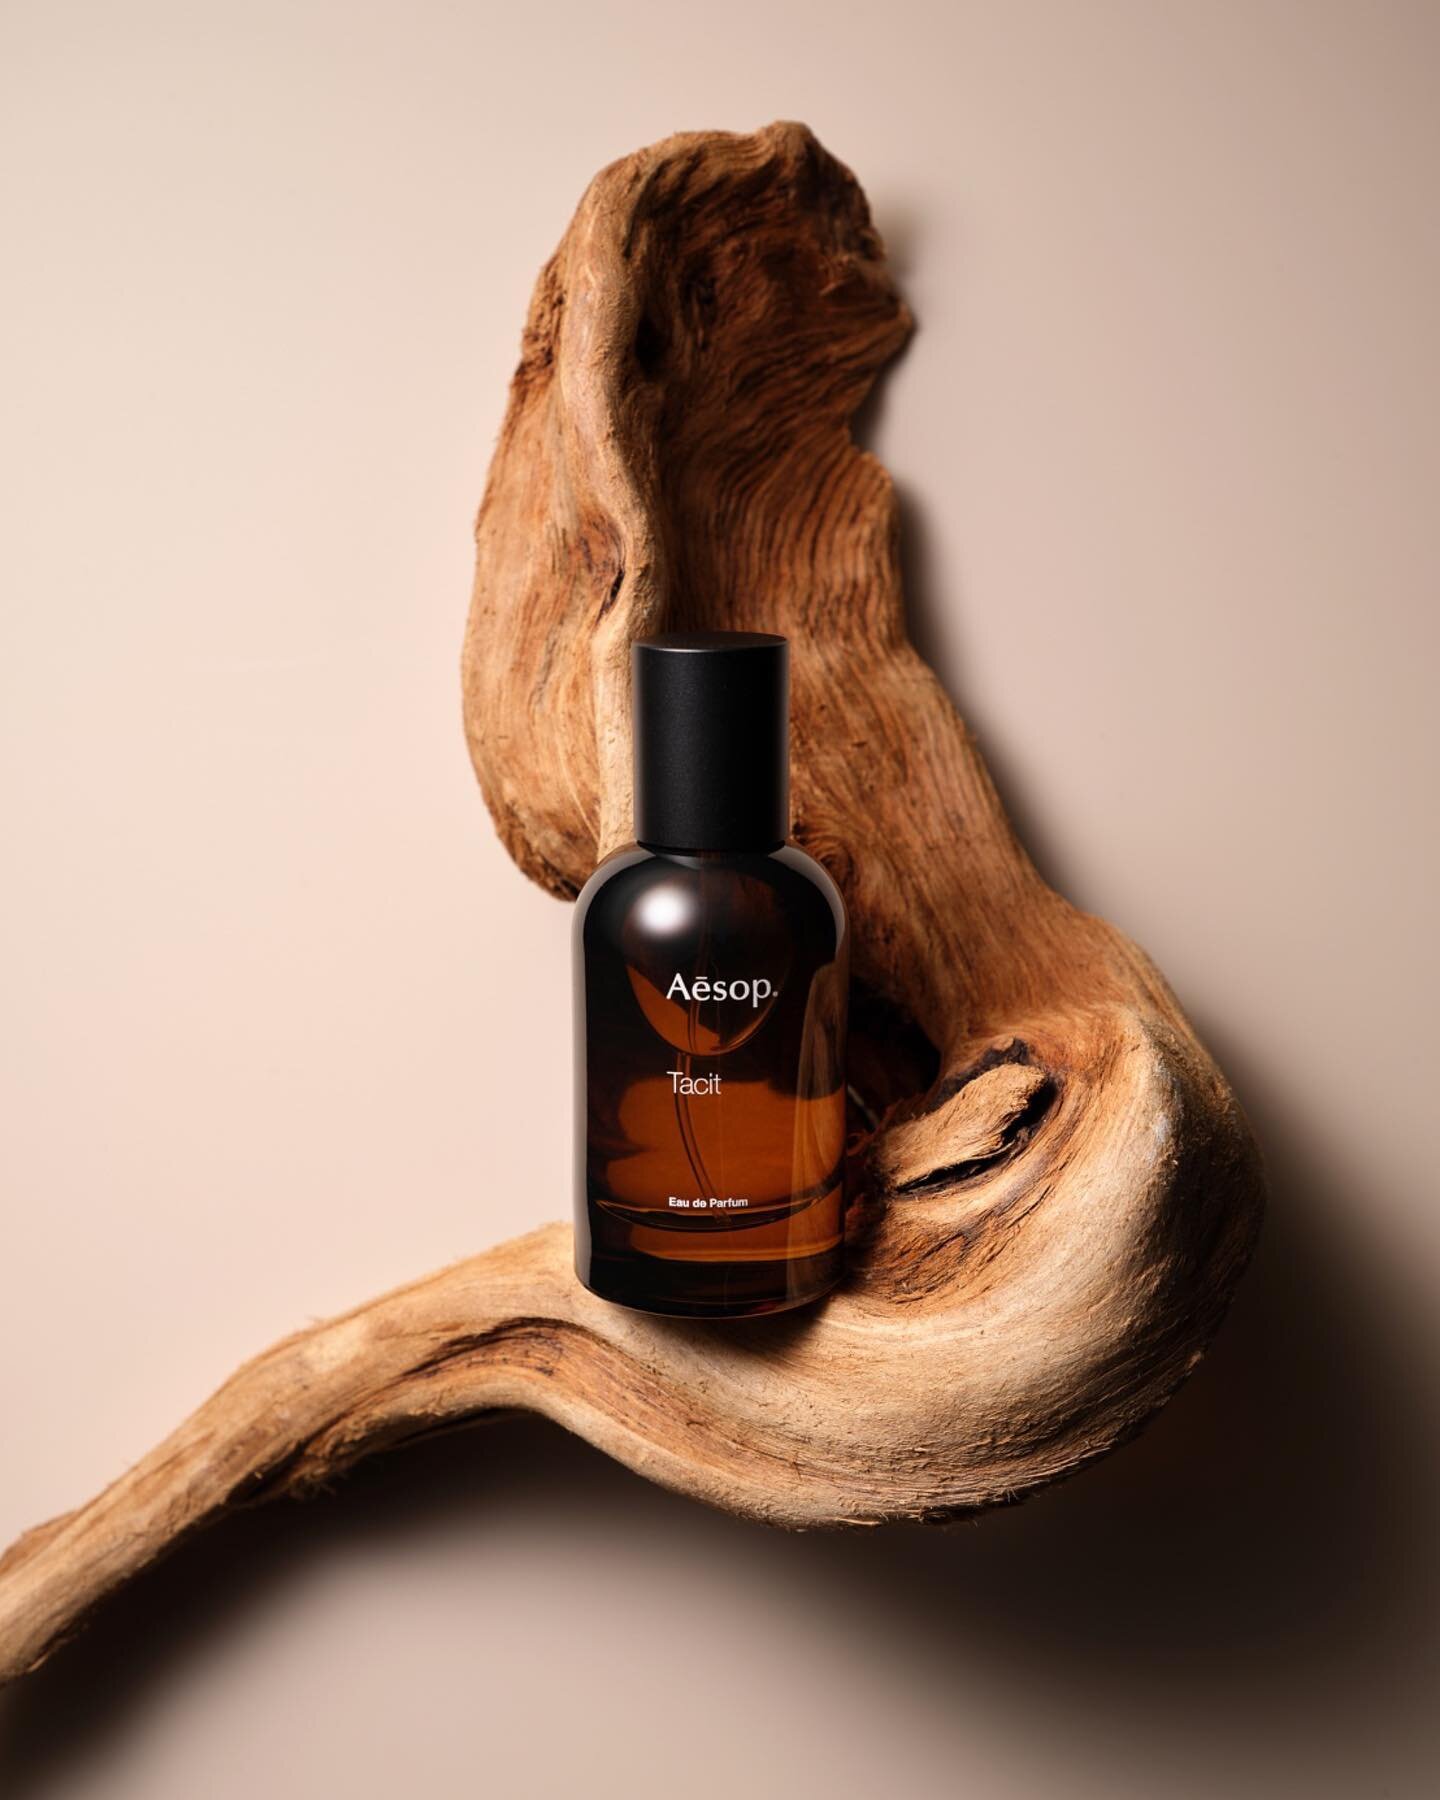 on the scent, fine fragrance product photography featuring @aesopskincare 
#fragrancephotography #productphotographer #londonphotographer #studiophotography